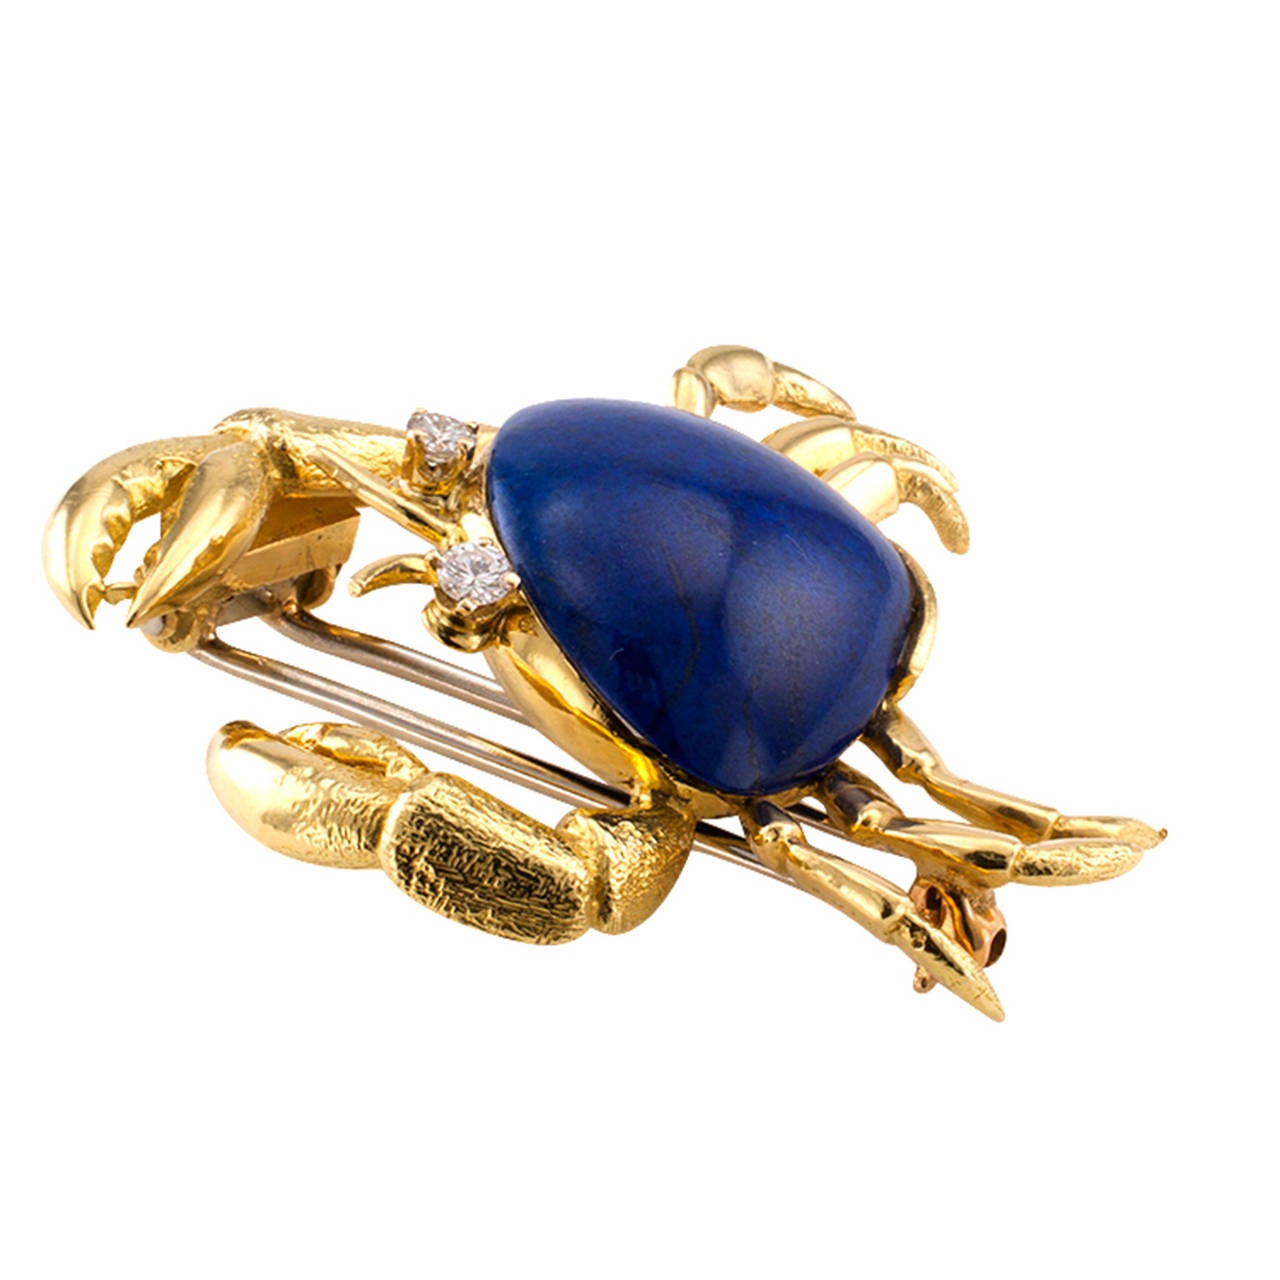 Tiffany & Co. Lapis Lazuli and Diamond Crab Brooch

Circa 1970, this 18 karat gold clip/brooch designed as a crab, its shell made of an incredible vibrant blue lapis stone along with glowing diamond eyes, by Tiffany & Co., approximately 1